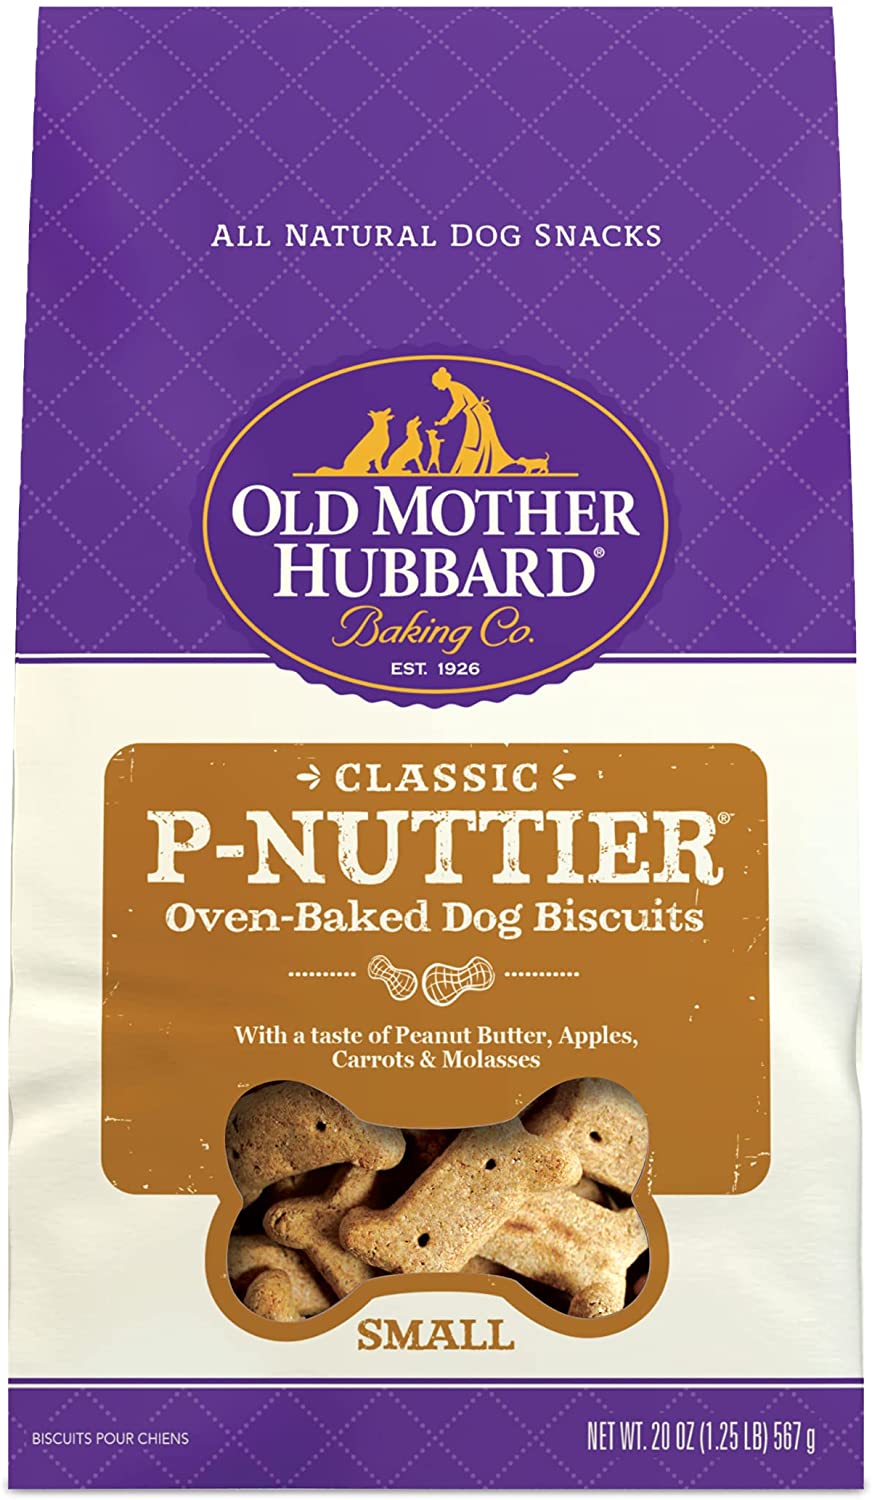 20-Oz Old Mother Hubbard Classic P-Nuttier Biscuits Baked Dog Treats (Small) $3.40 w/ S&S + Free Shipping w/ Prime or on $25+